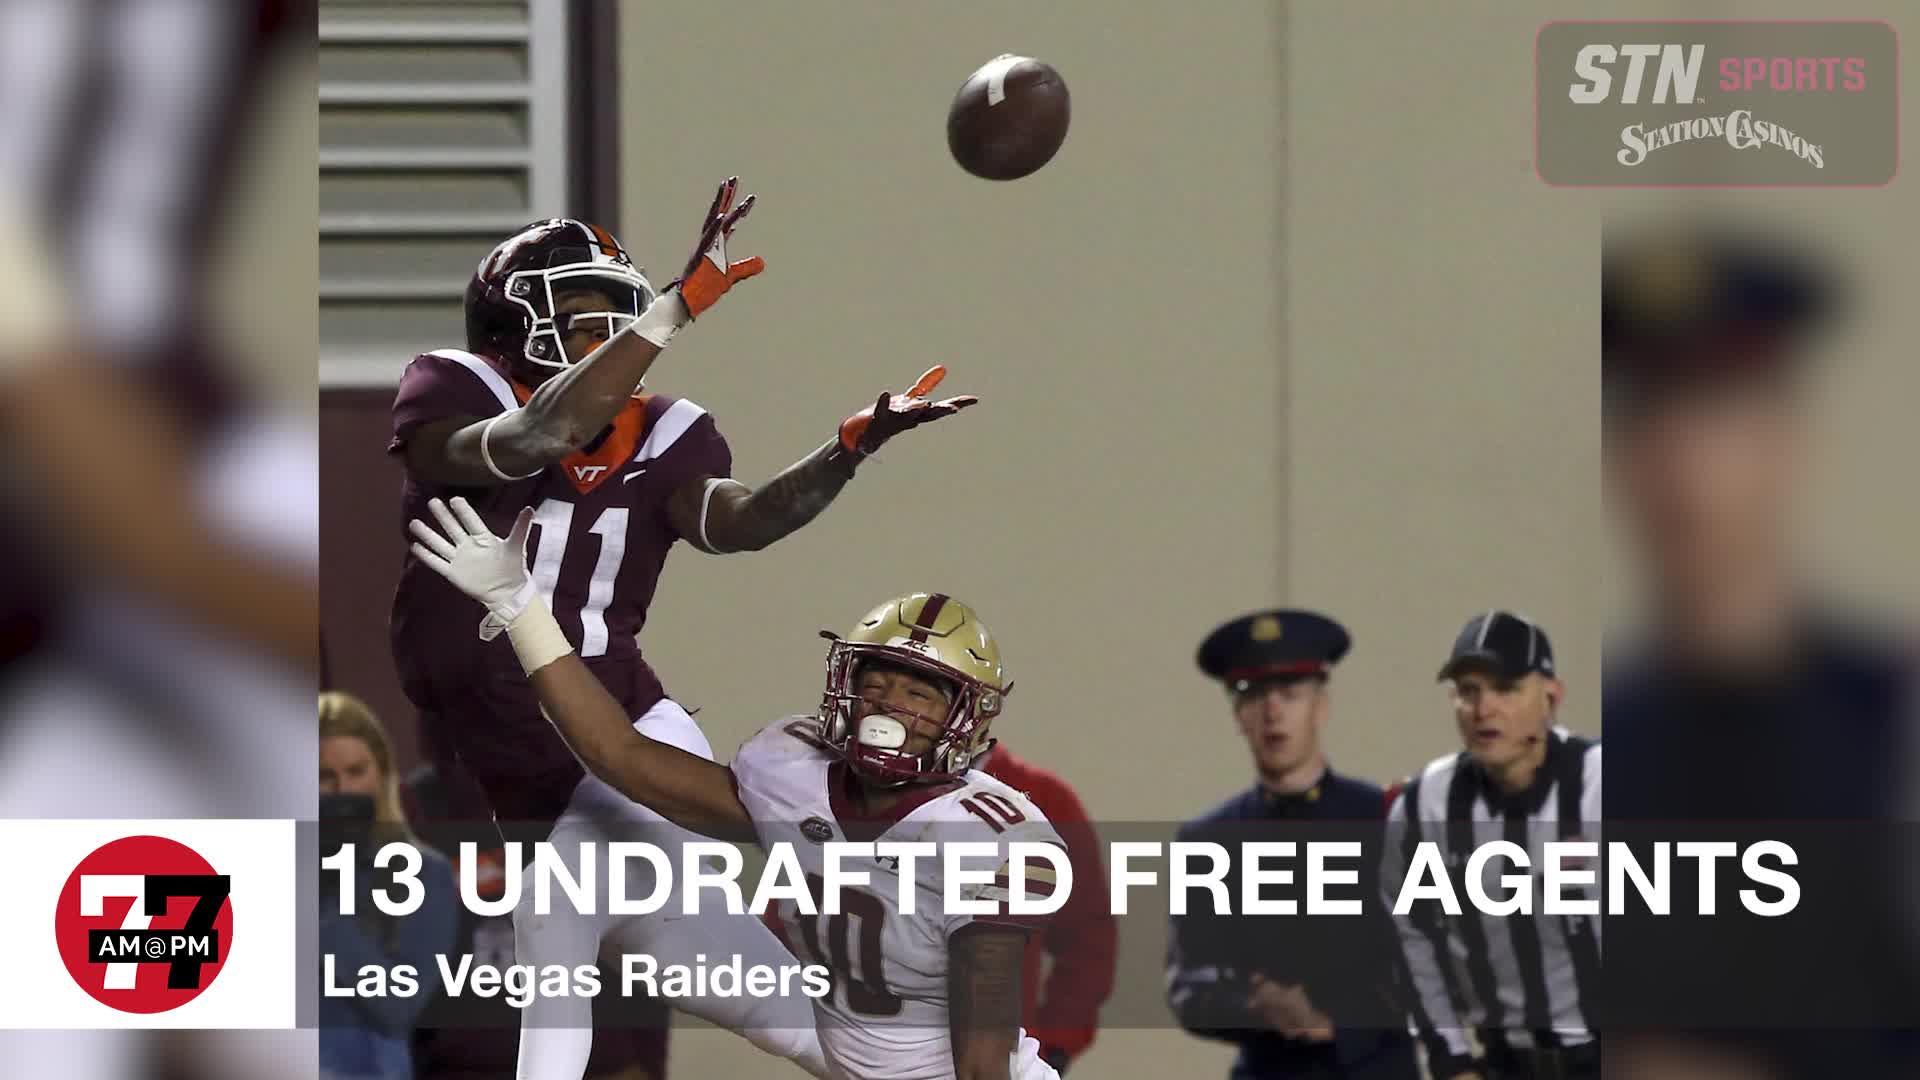 Raiders sign Undrafted Free Agents